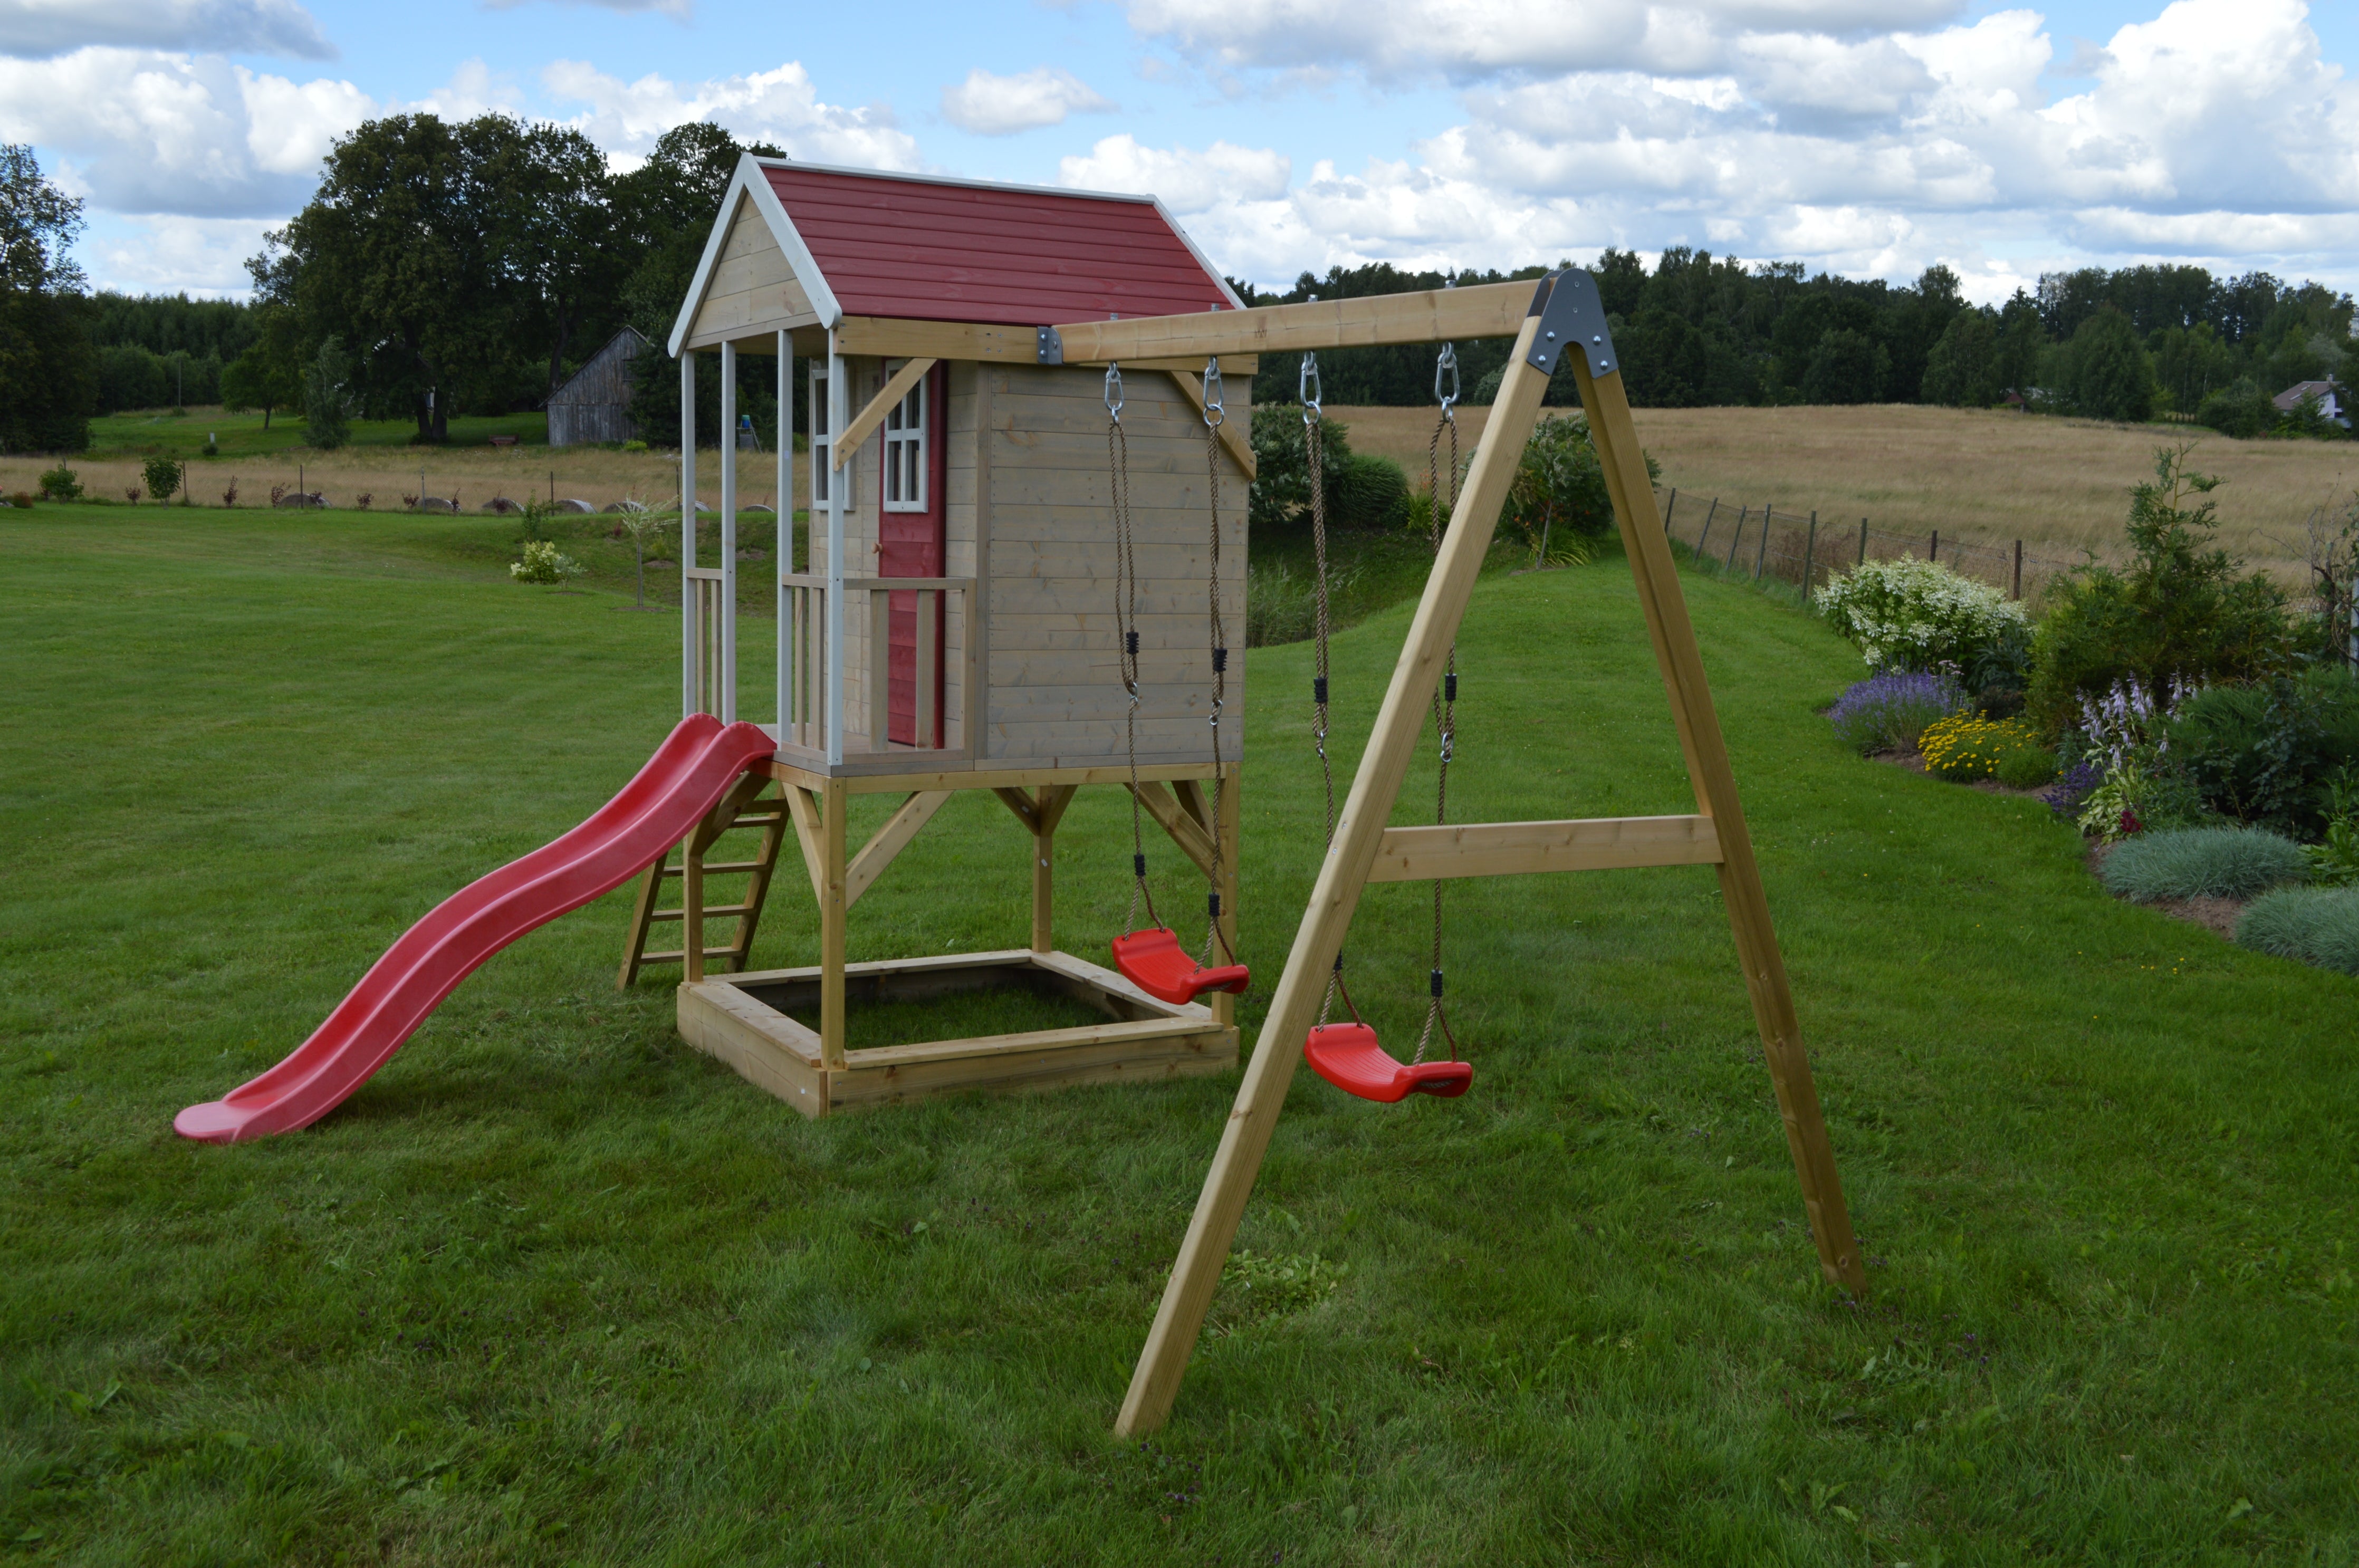 M30R-G Nordic Adventure House with Platform, Slide and Double Swing + Gym Attachment